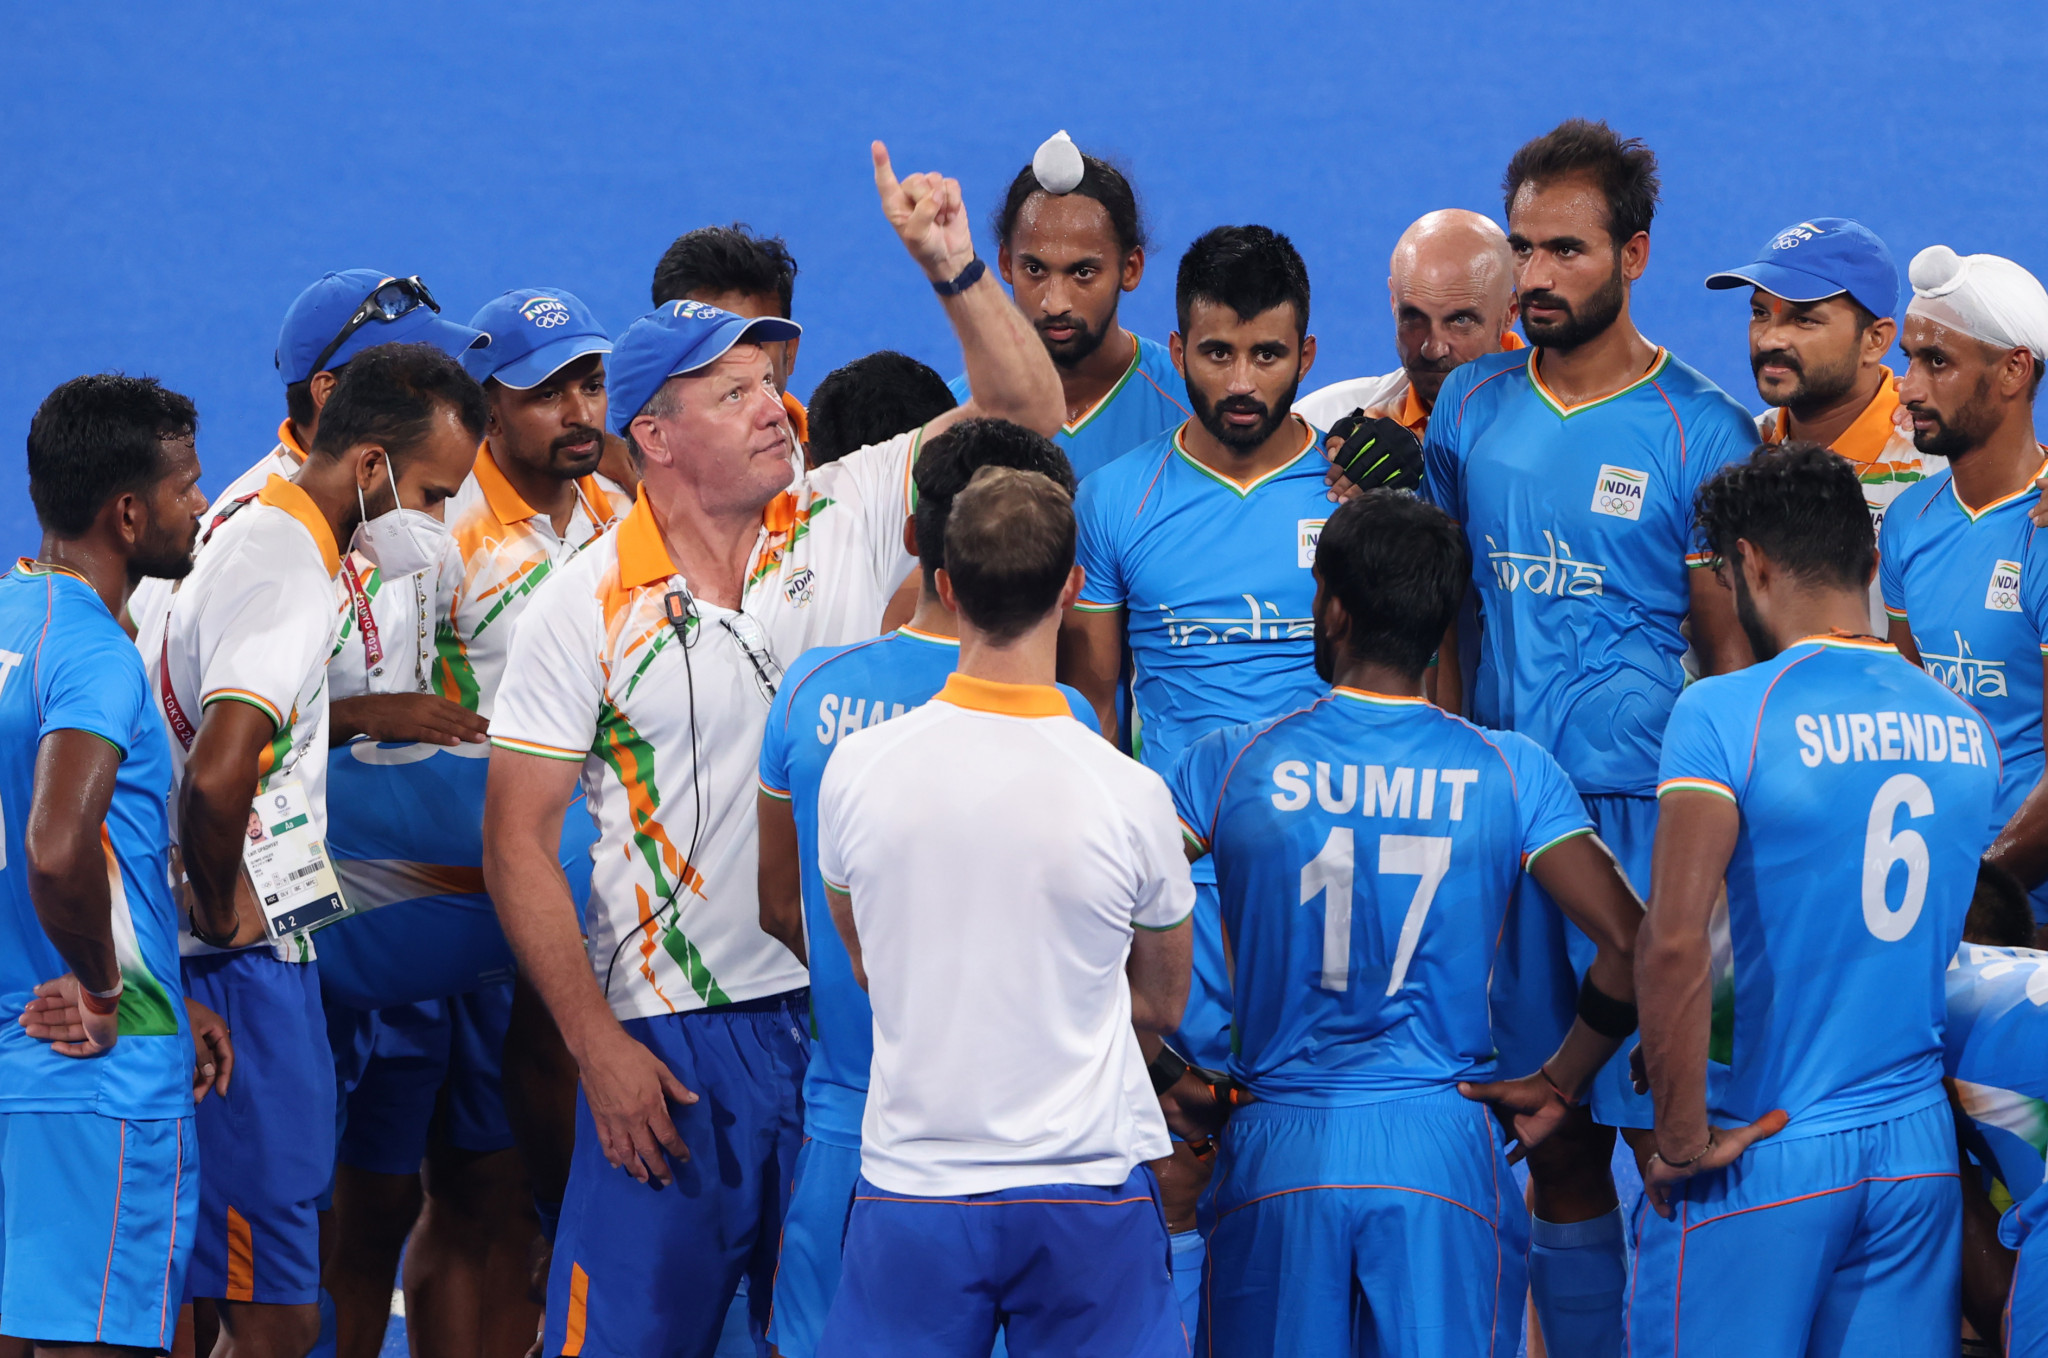 India might send senior players for Birmingham 2022 following the cancellation of the Asian Games ©Getty Images